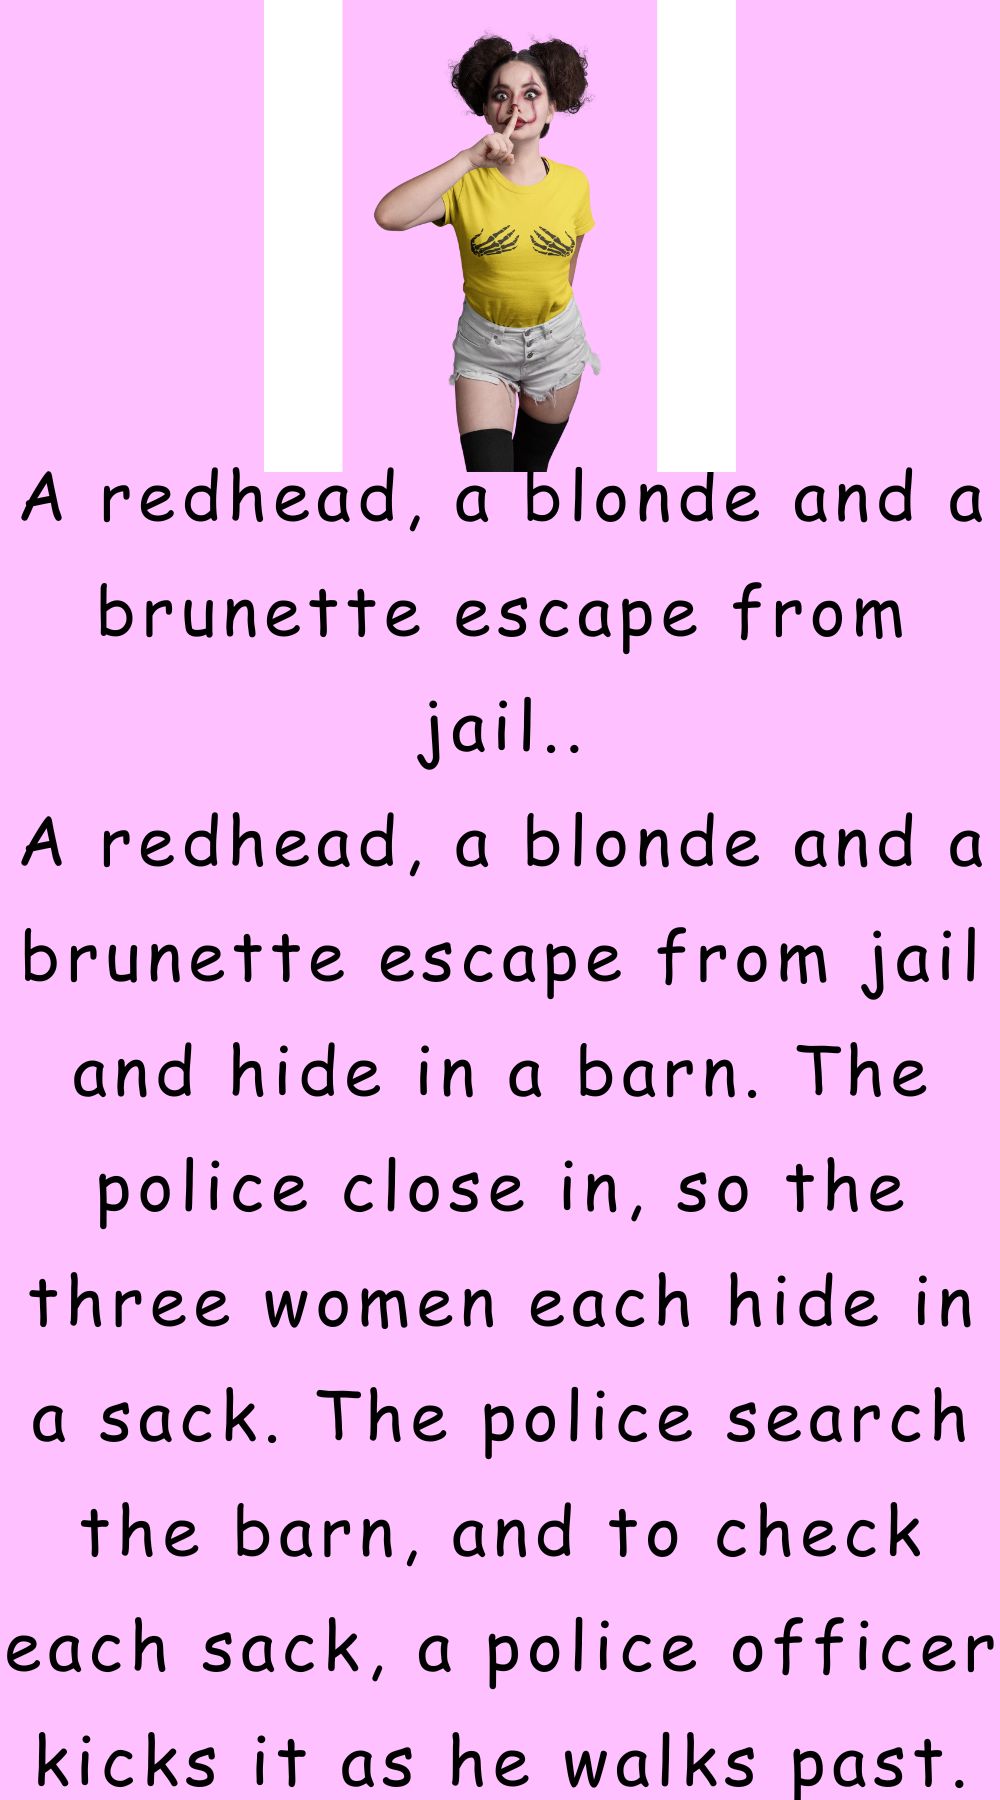 A brunette escape from jail